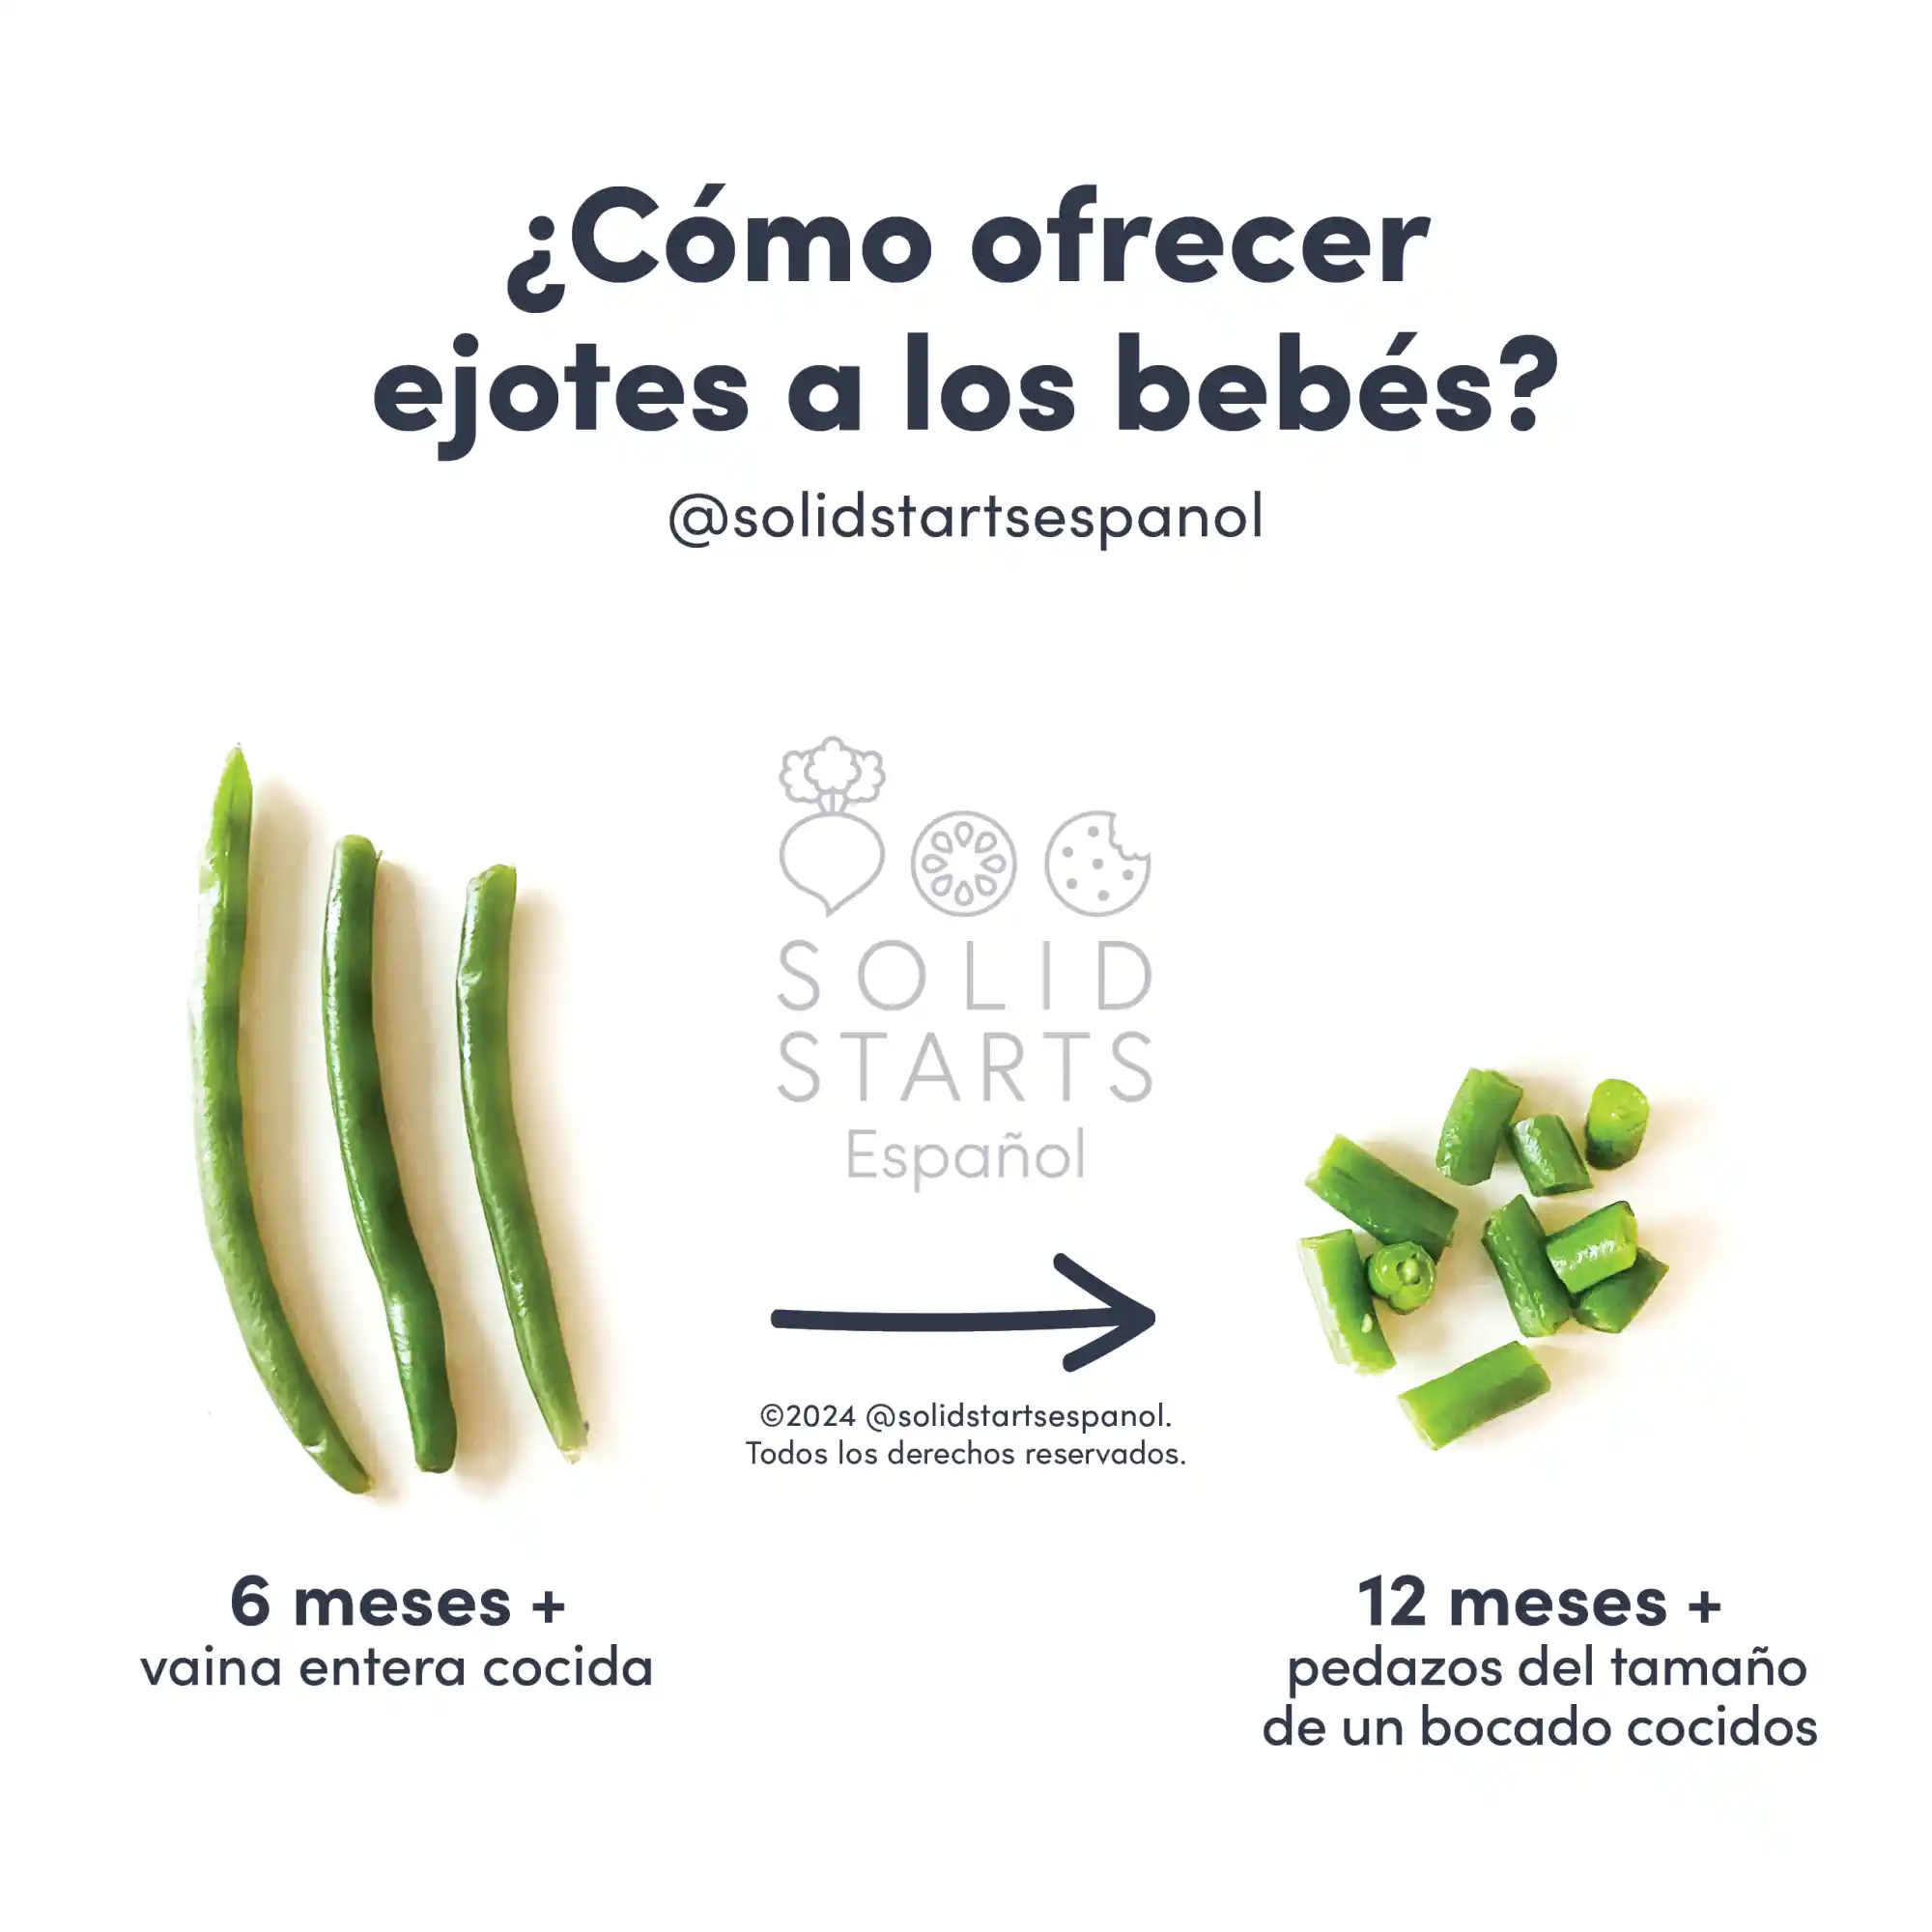 An infographic Titled How to Cut Green Beans for Babies and images showing whole, cooked green beans at 6-12 months+, bite size pieces at 12-18 months+, and either whole or bite size pieces for 18 months +